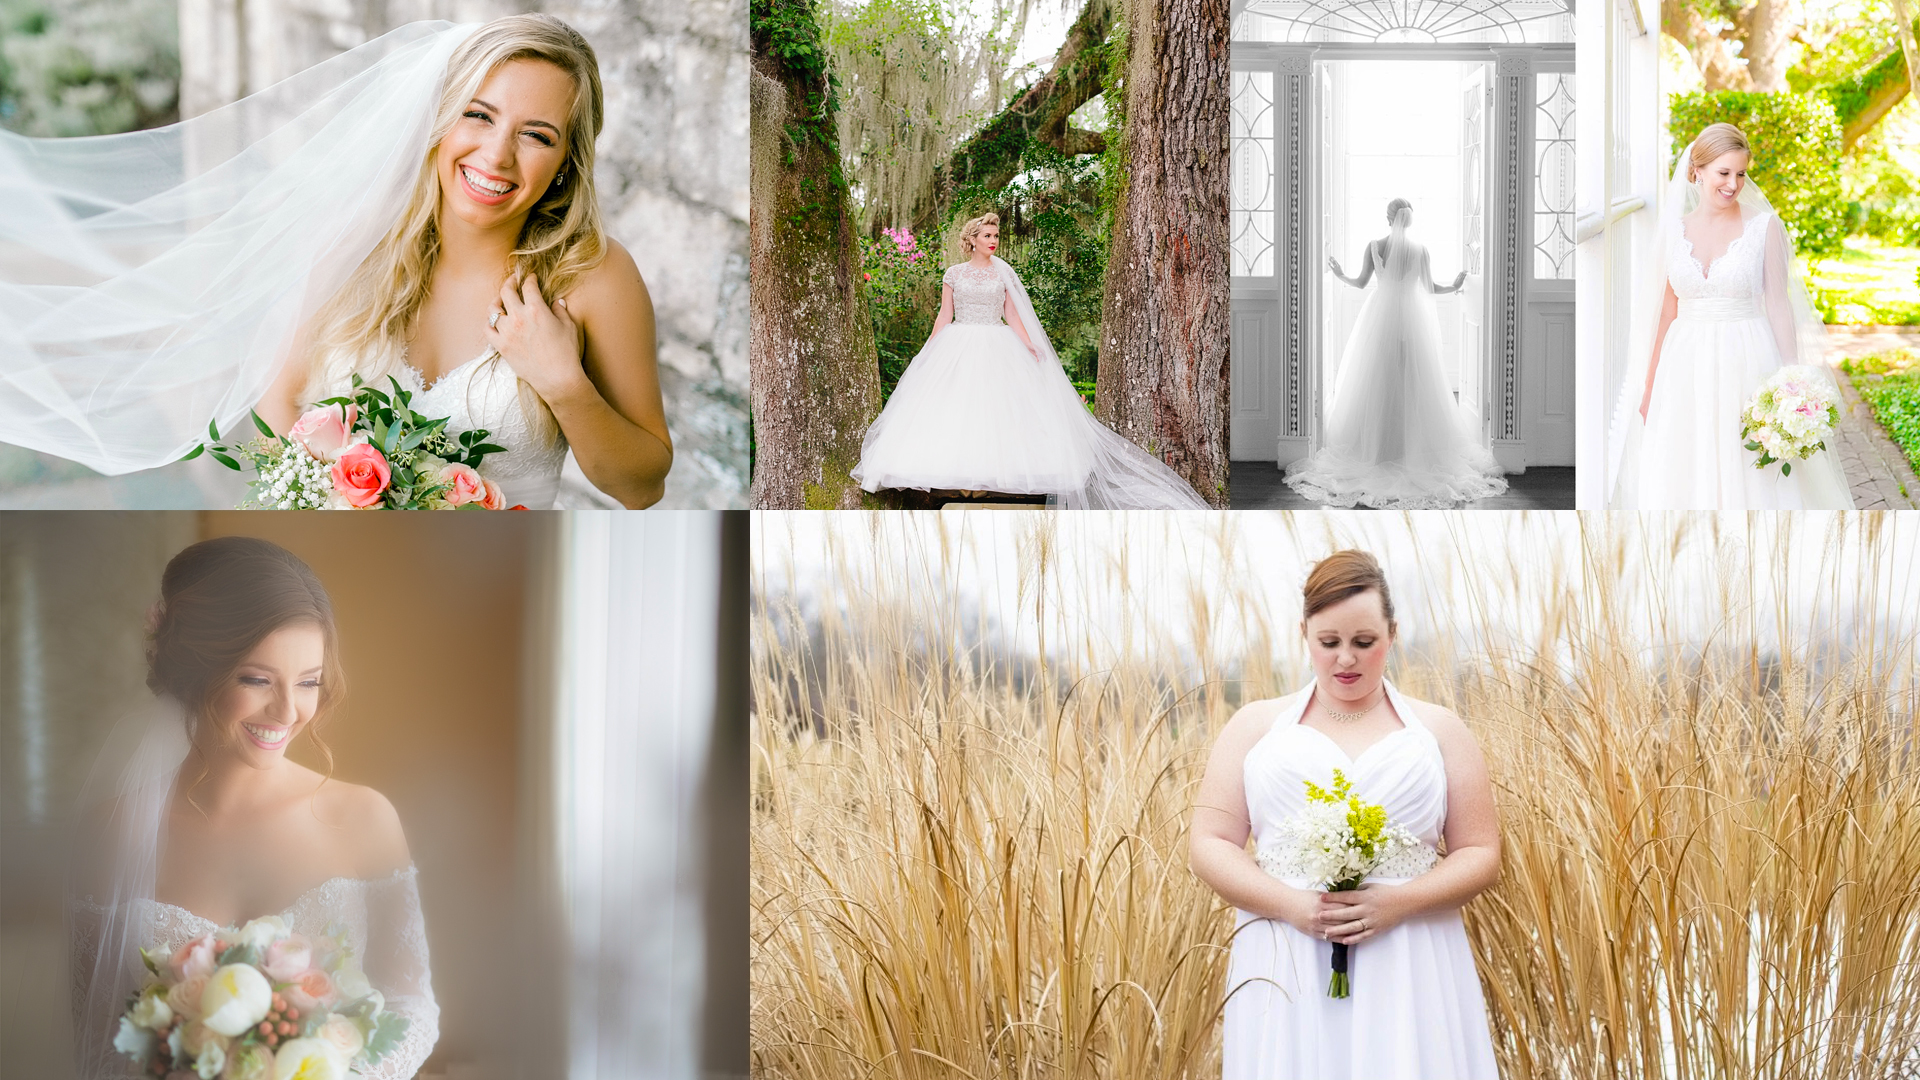 What Are Bridal Portraits And Why Should You Take Them?